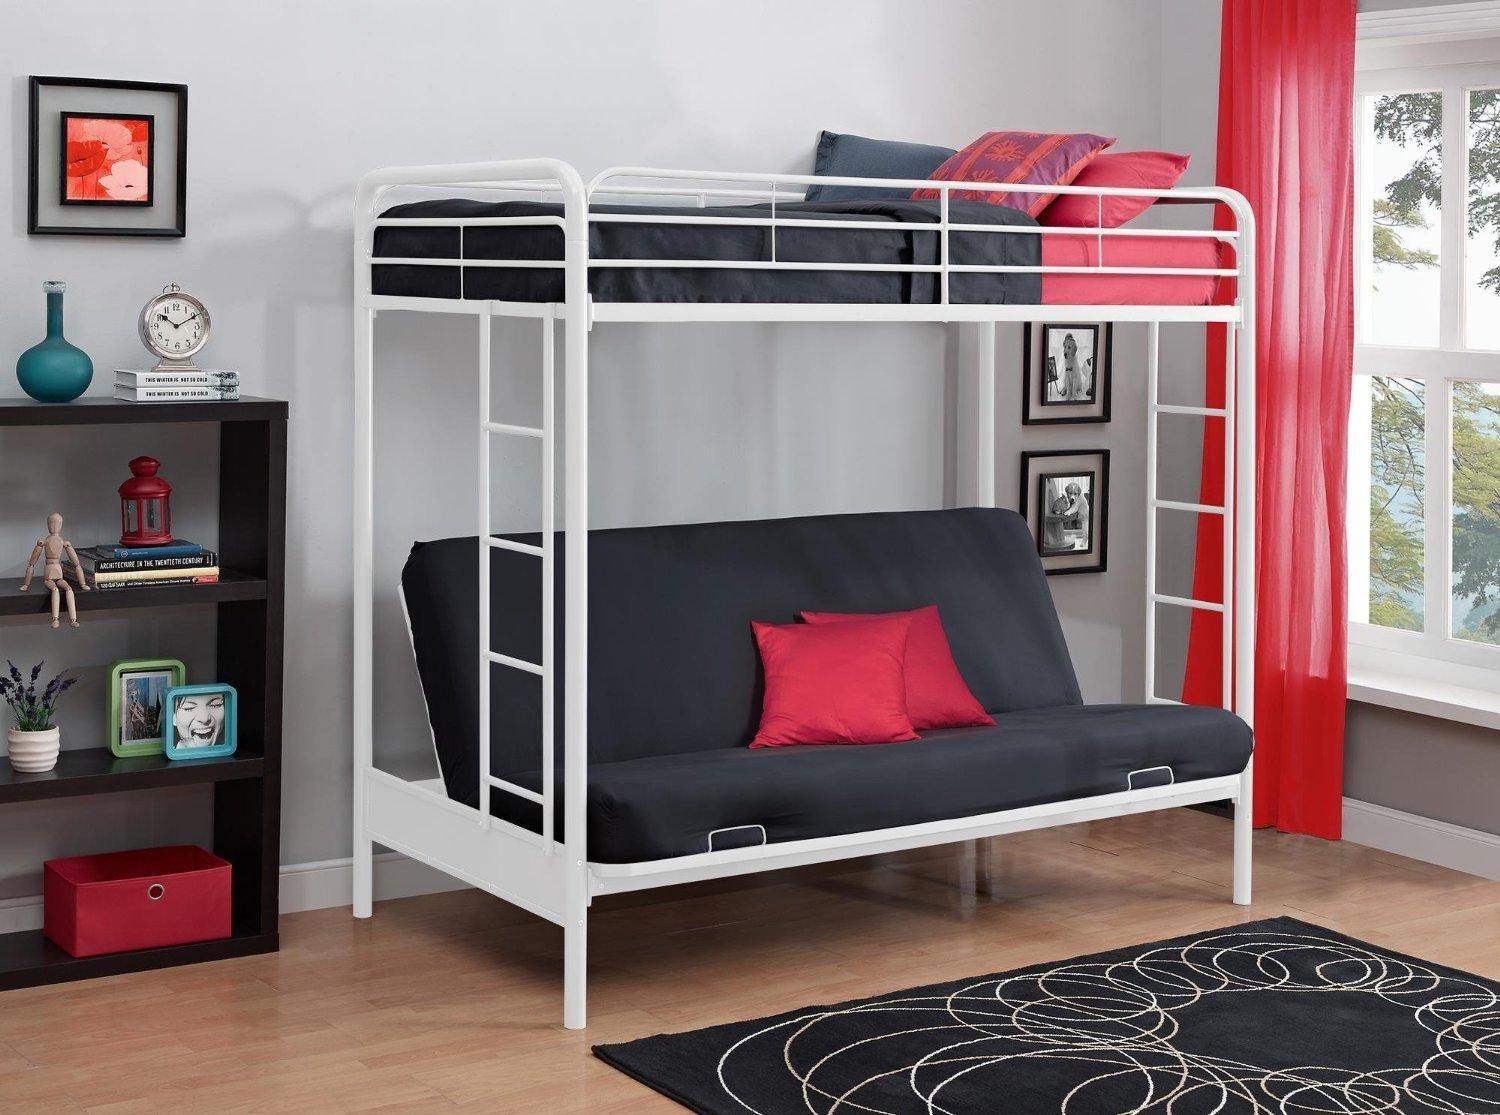 total-fab-metal-wood-loft-beds-with-sofa-underneath-throughout-bunk-bed-with-sofas-underneath